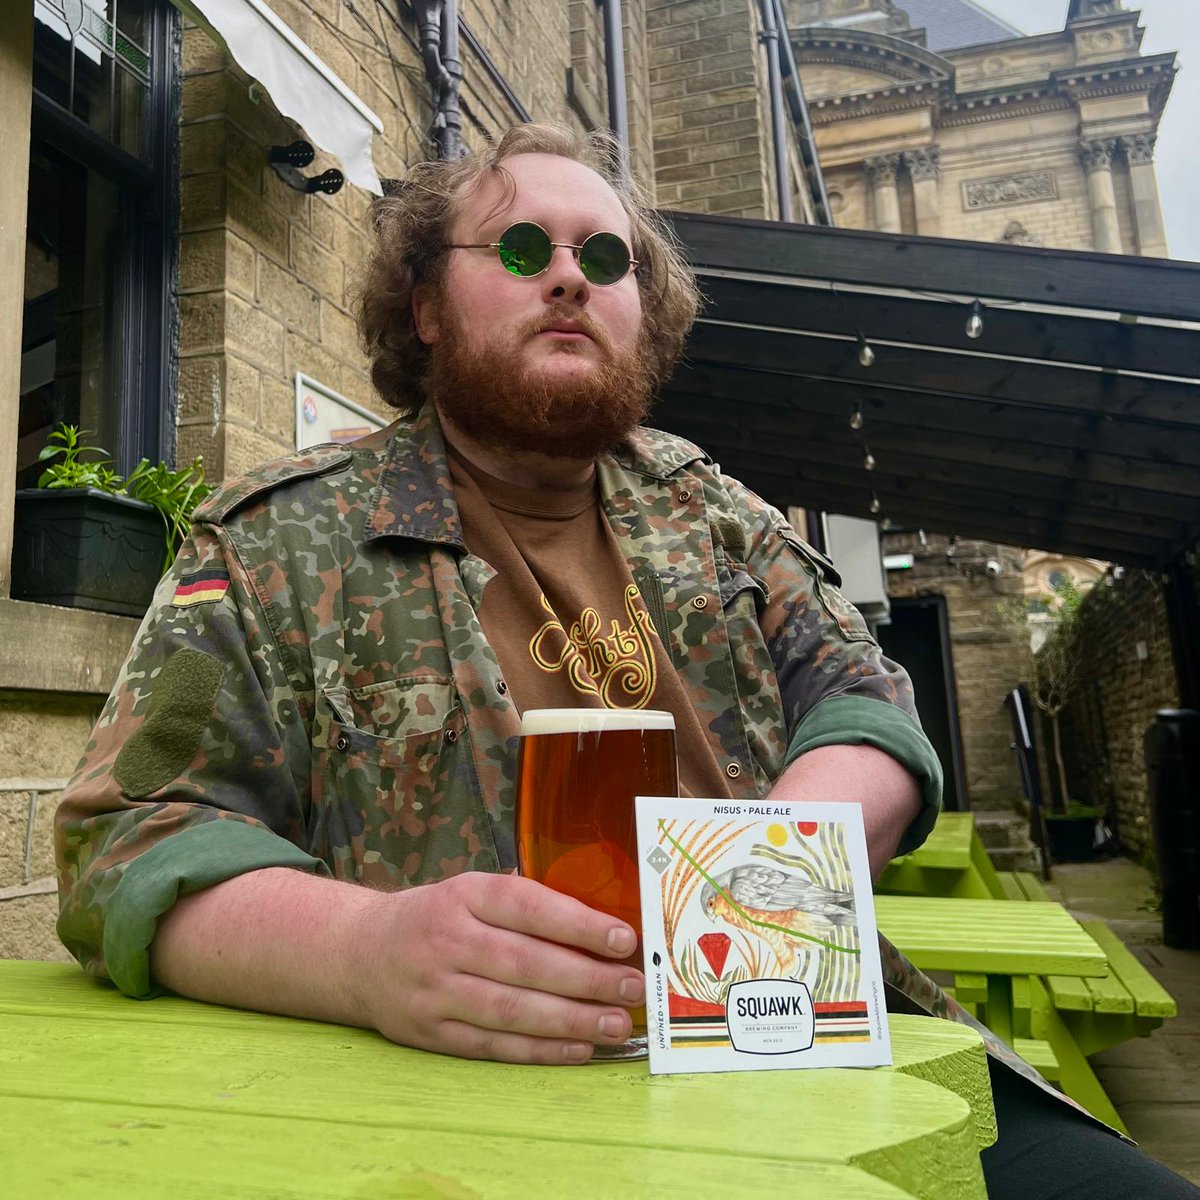 Will has gone insane as this is our last cask of Squawk, that hes turned himself into a bird of prey Captured was him exiting the garden in full flight but don't worry the beer is still on the bar! Nisus - Munich malt base with Idaho 7, flavours of zesty tangerines & heavy malt